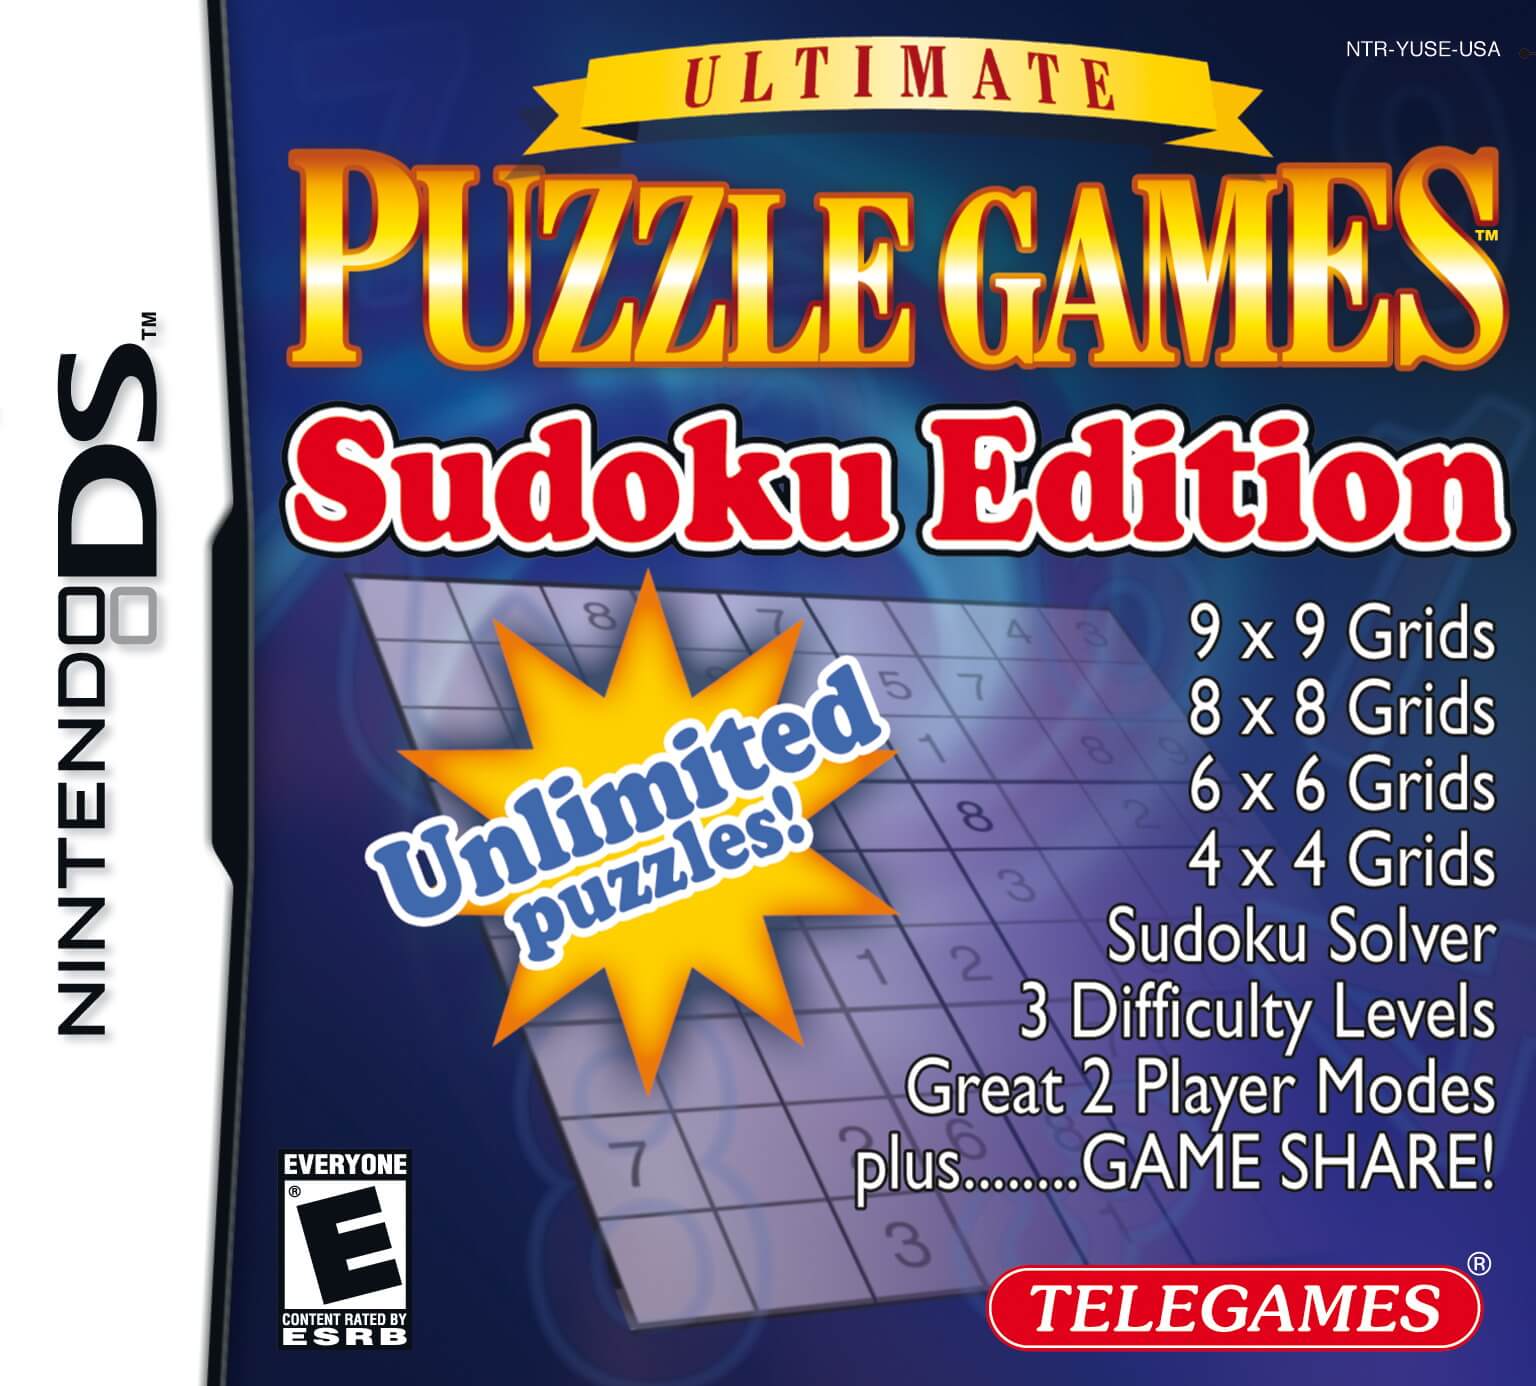 Ultimate Puzzle Games Sudoku Edition